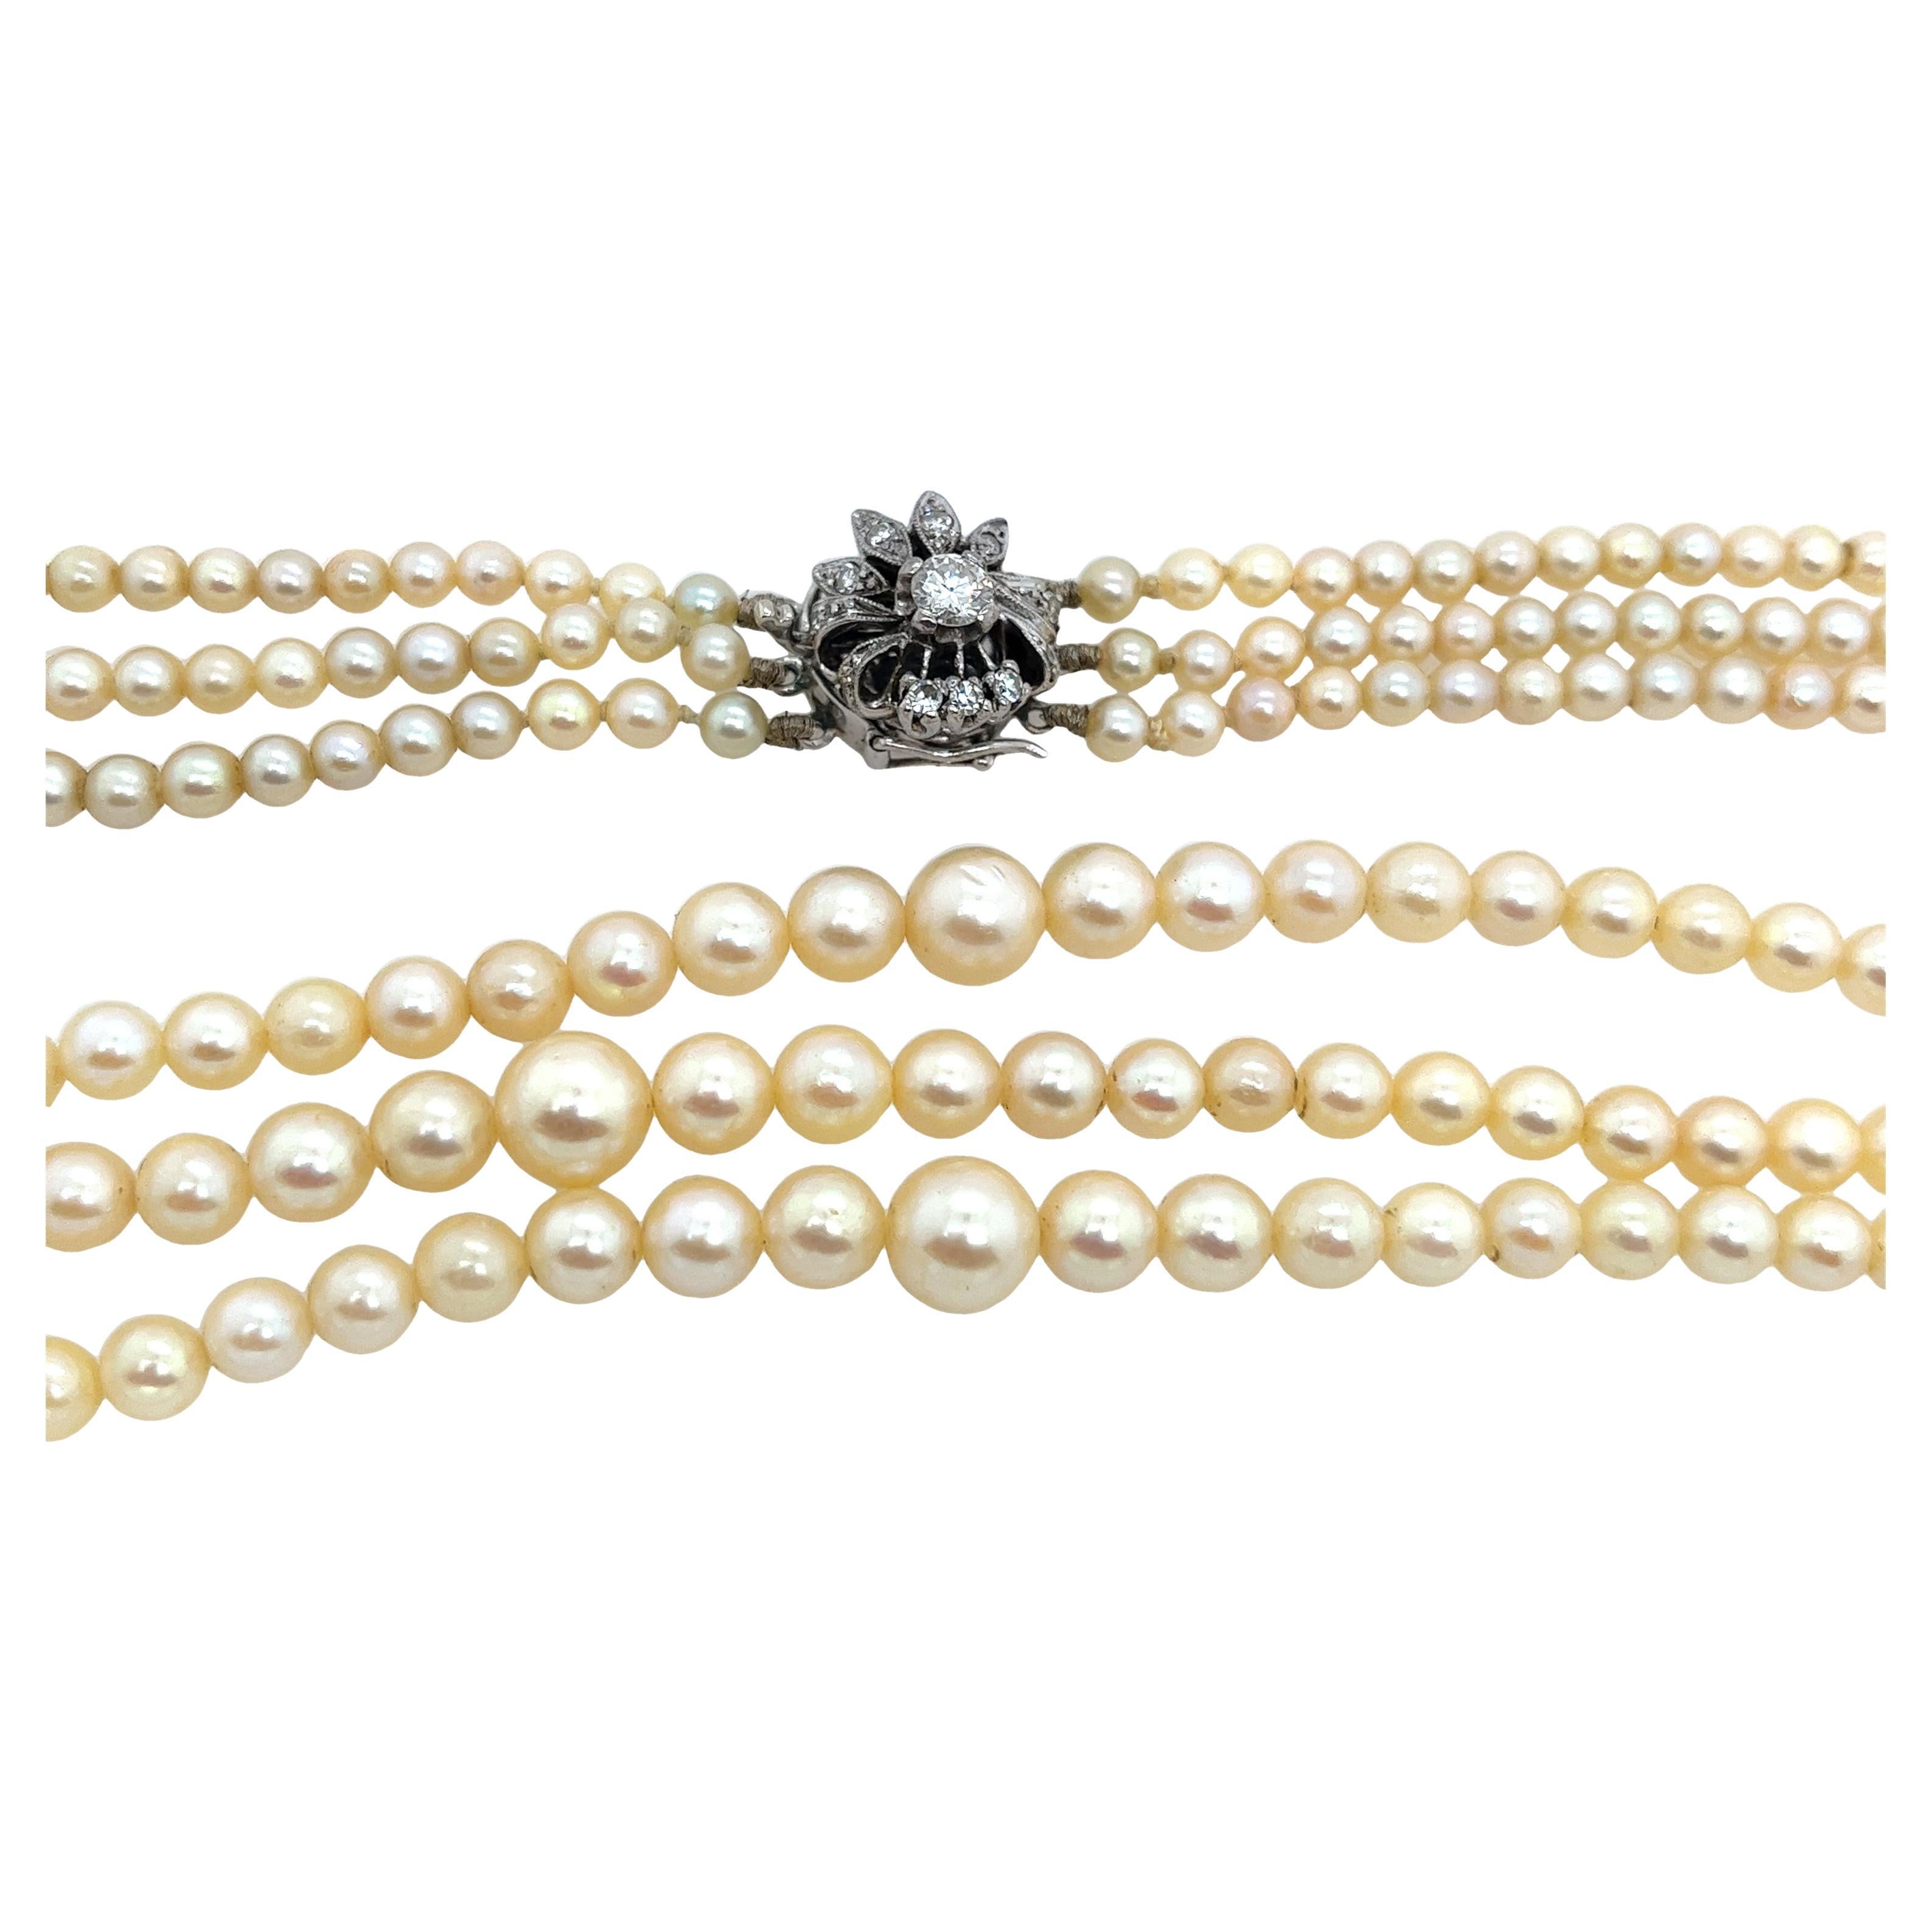 Vintage 3 Row 7.3mm-3.55m Graduated Cultured Pearl Necklace With Diamond Clasp For Sale